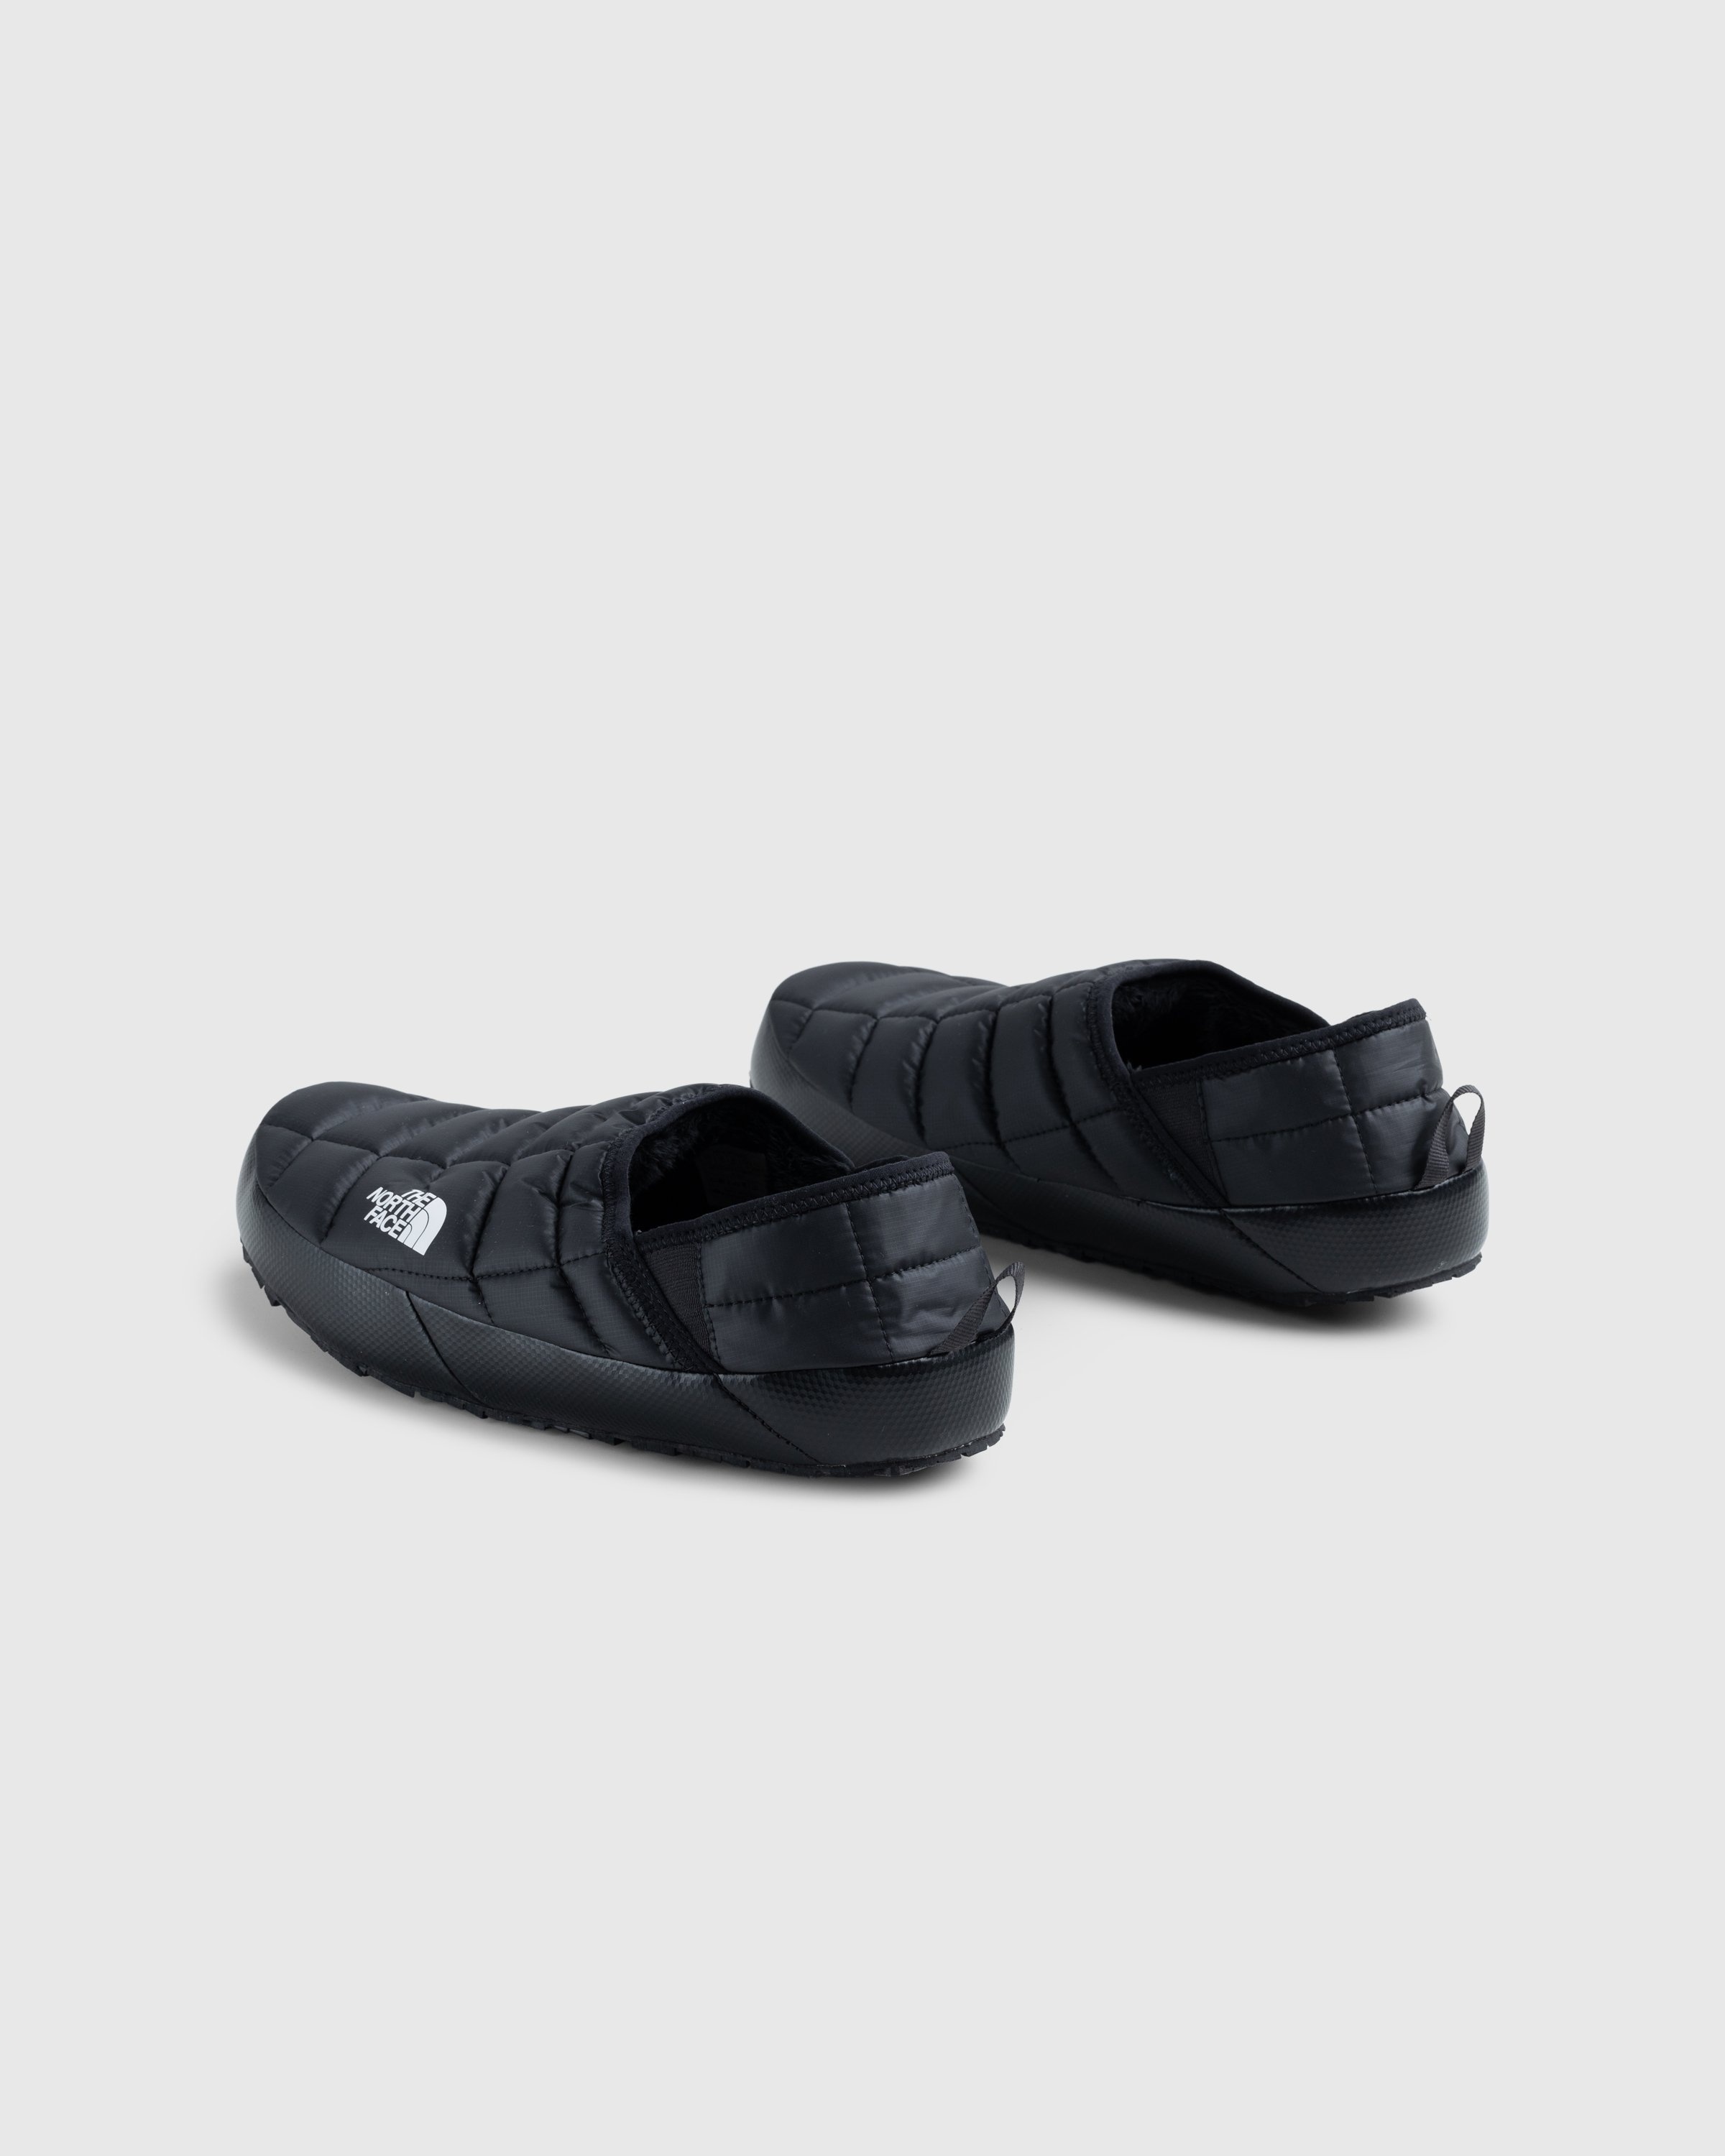 The North Face – ThermoBall Traction Mules V TNF Black/White - Sandals & Slides - Black - Image 4